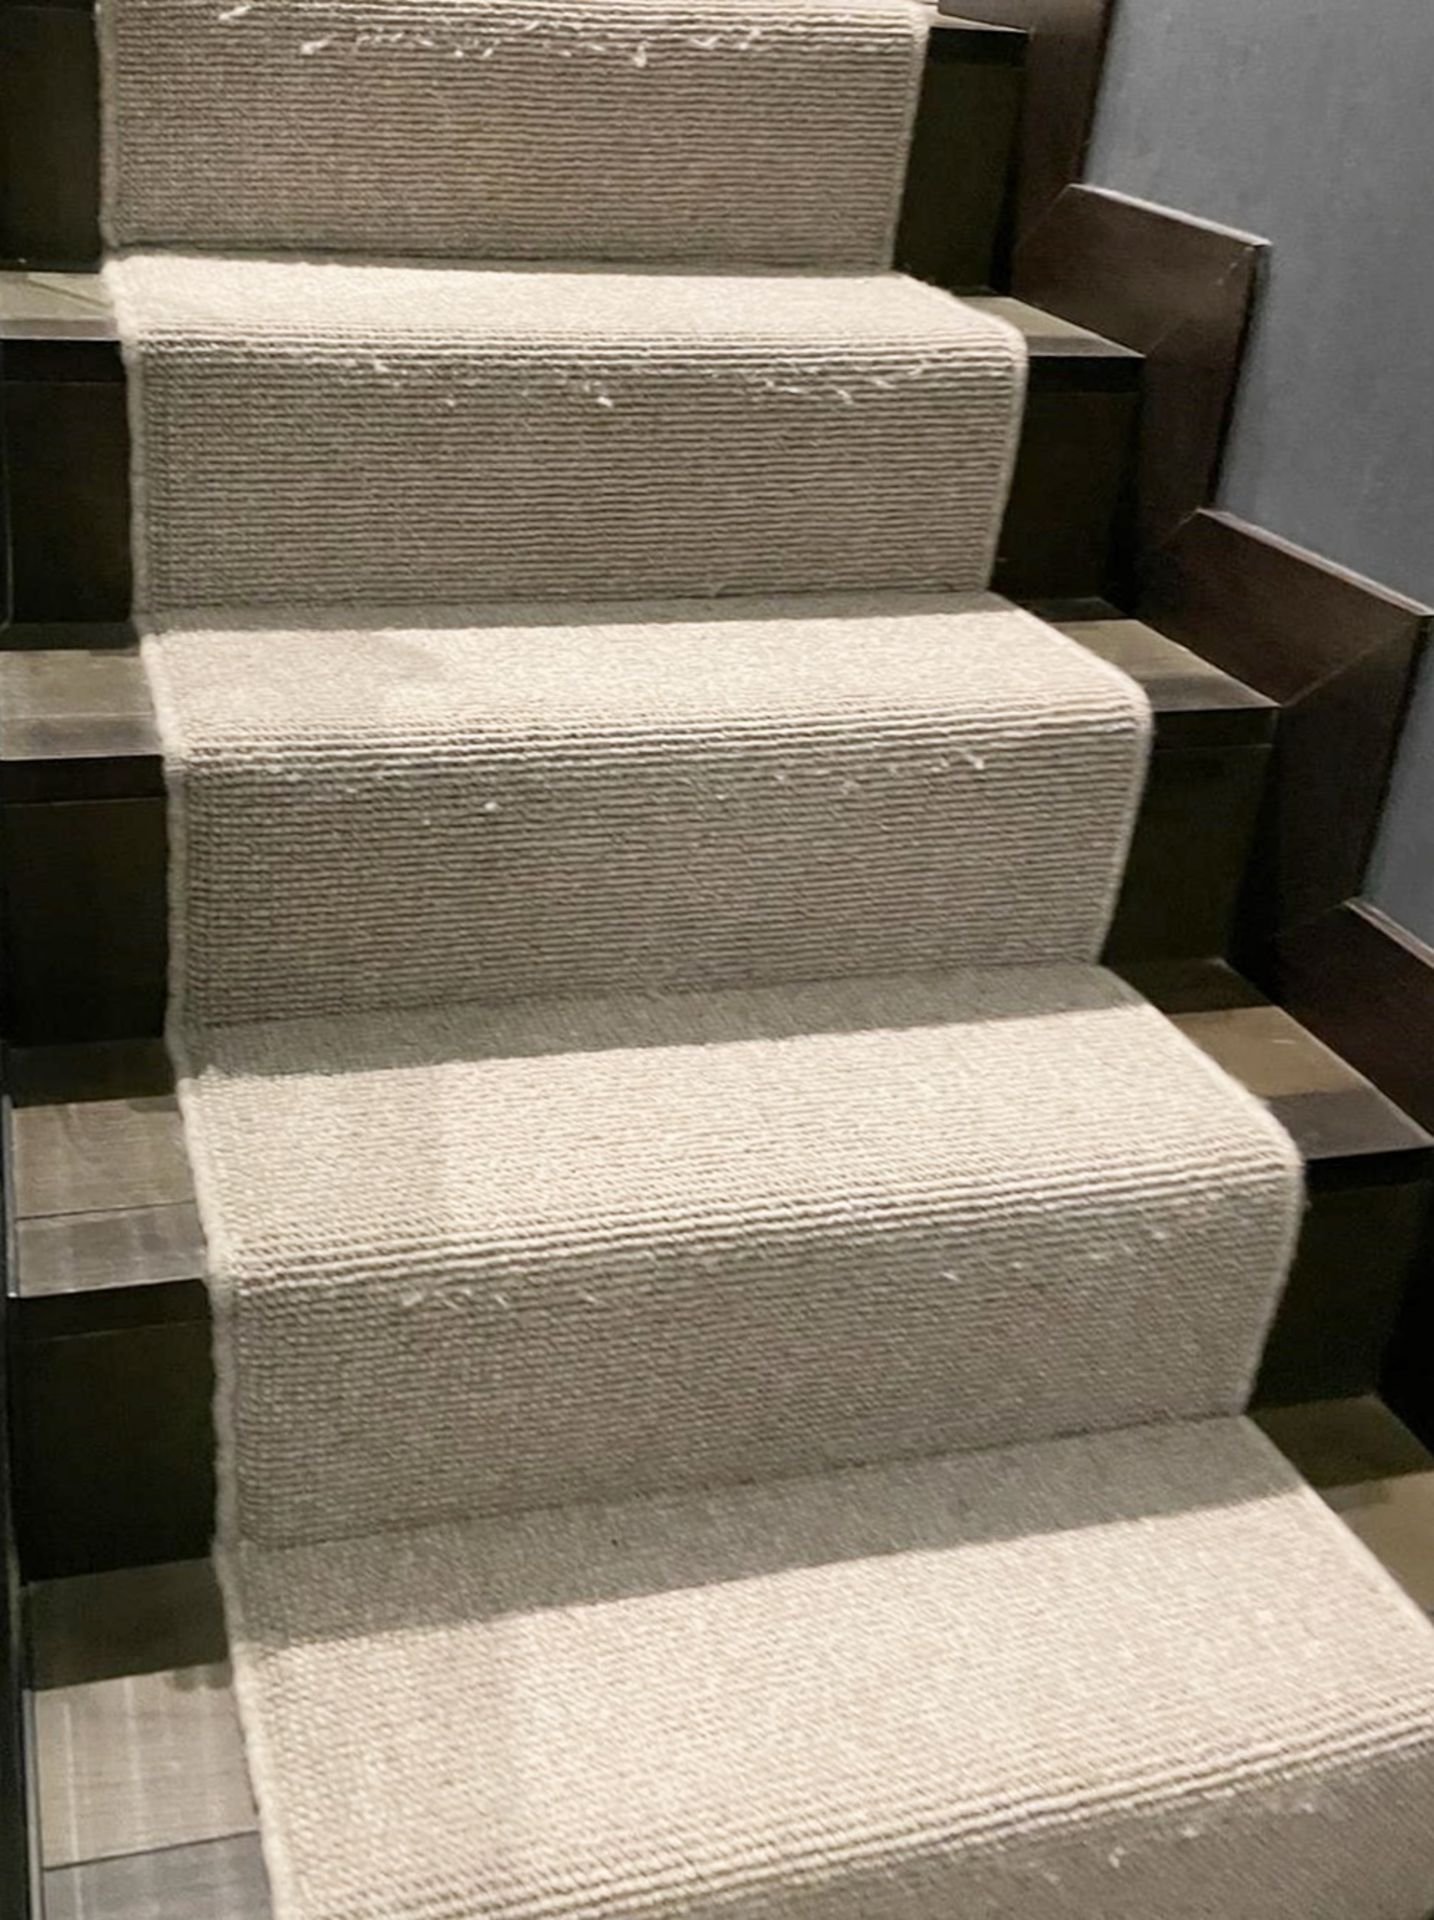 3 x Sections of Premium Woven Stairway Carpets in a Neutral Tone - CL894 - NO VAT ON THE HAMMER - Image 14 of 14